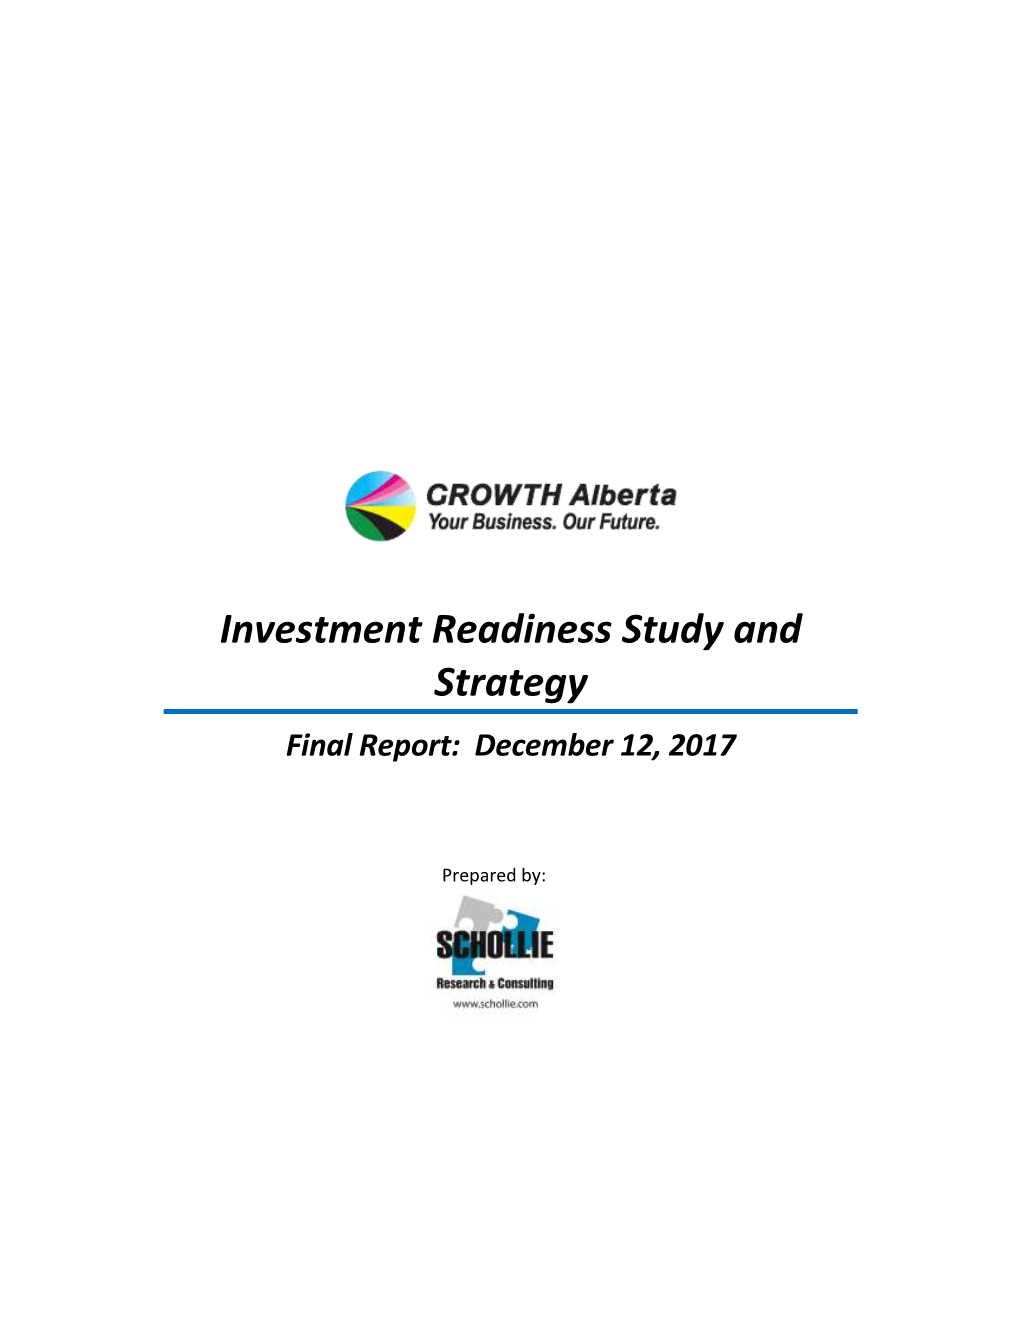 Investment Readiness Study and Strategy Final Report: December 12, 2017